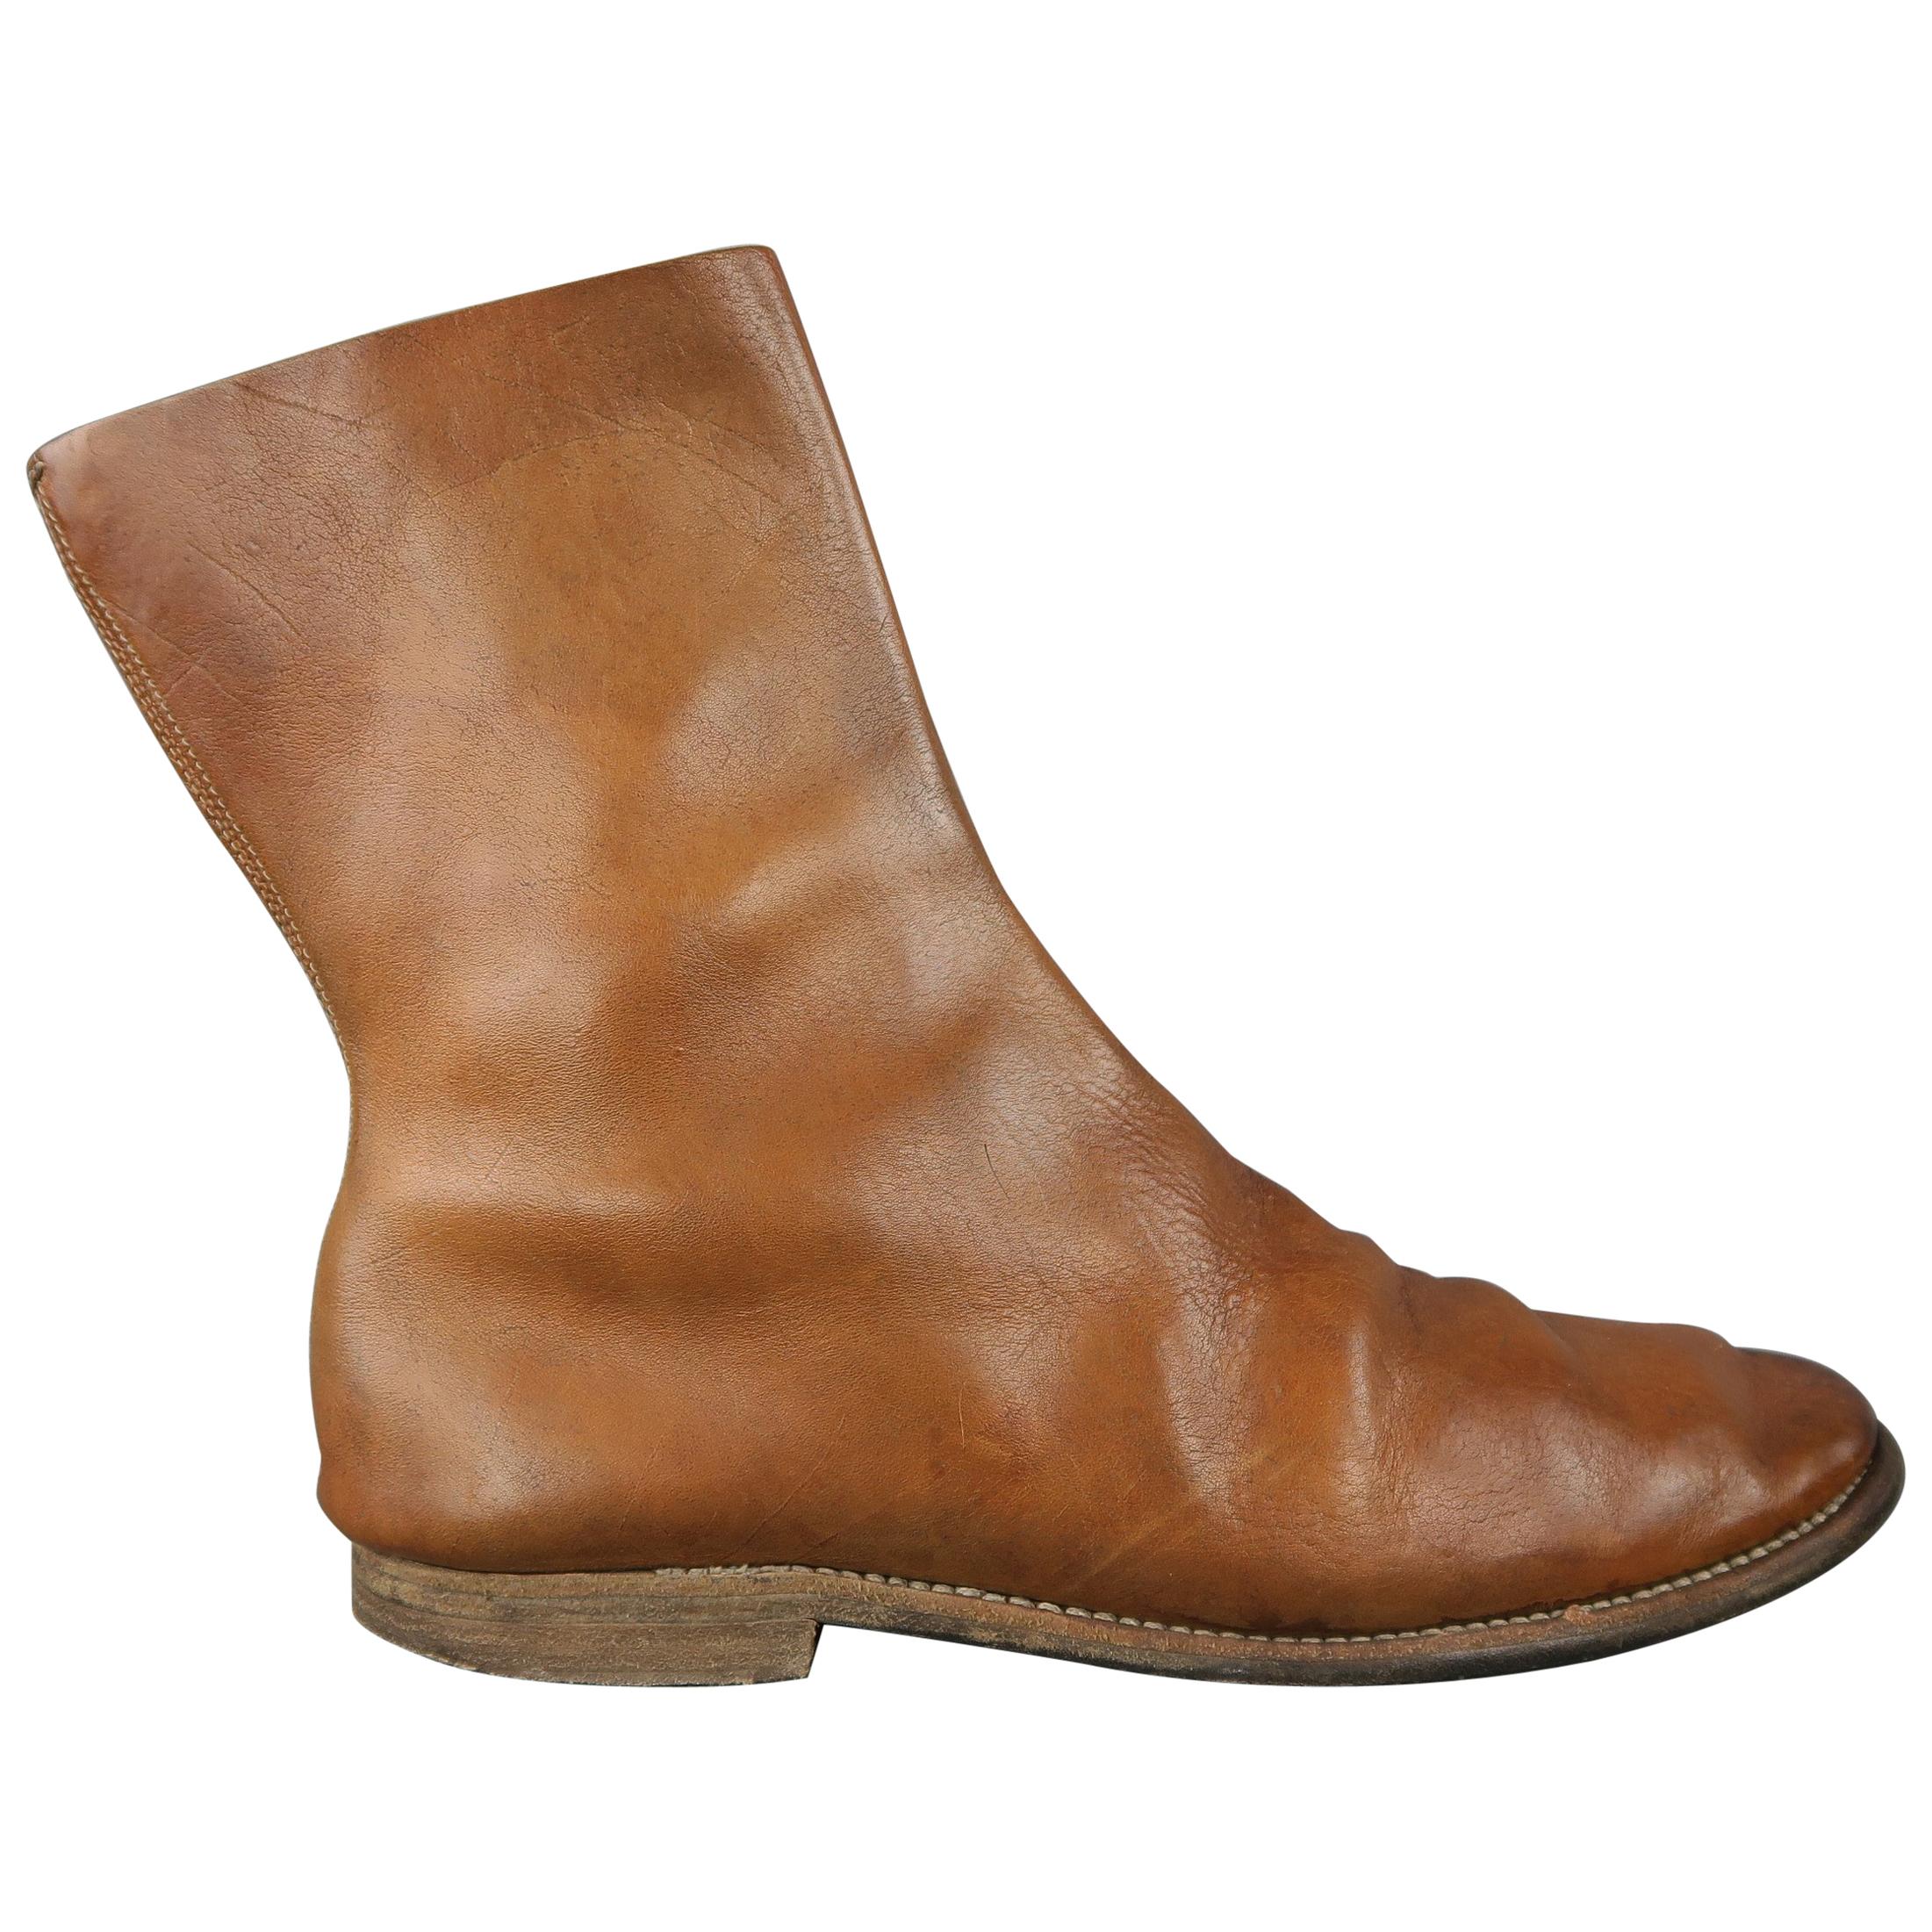 Guidi Tan Distressed Leather Ankle Boots / Shoes